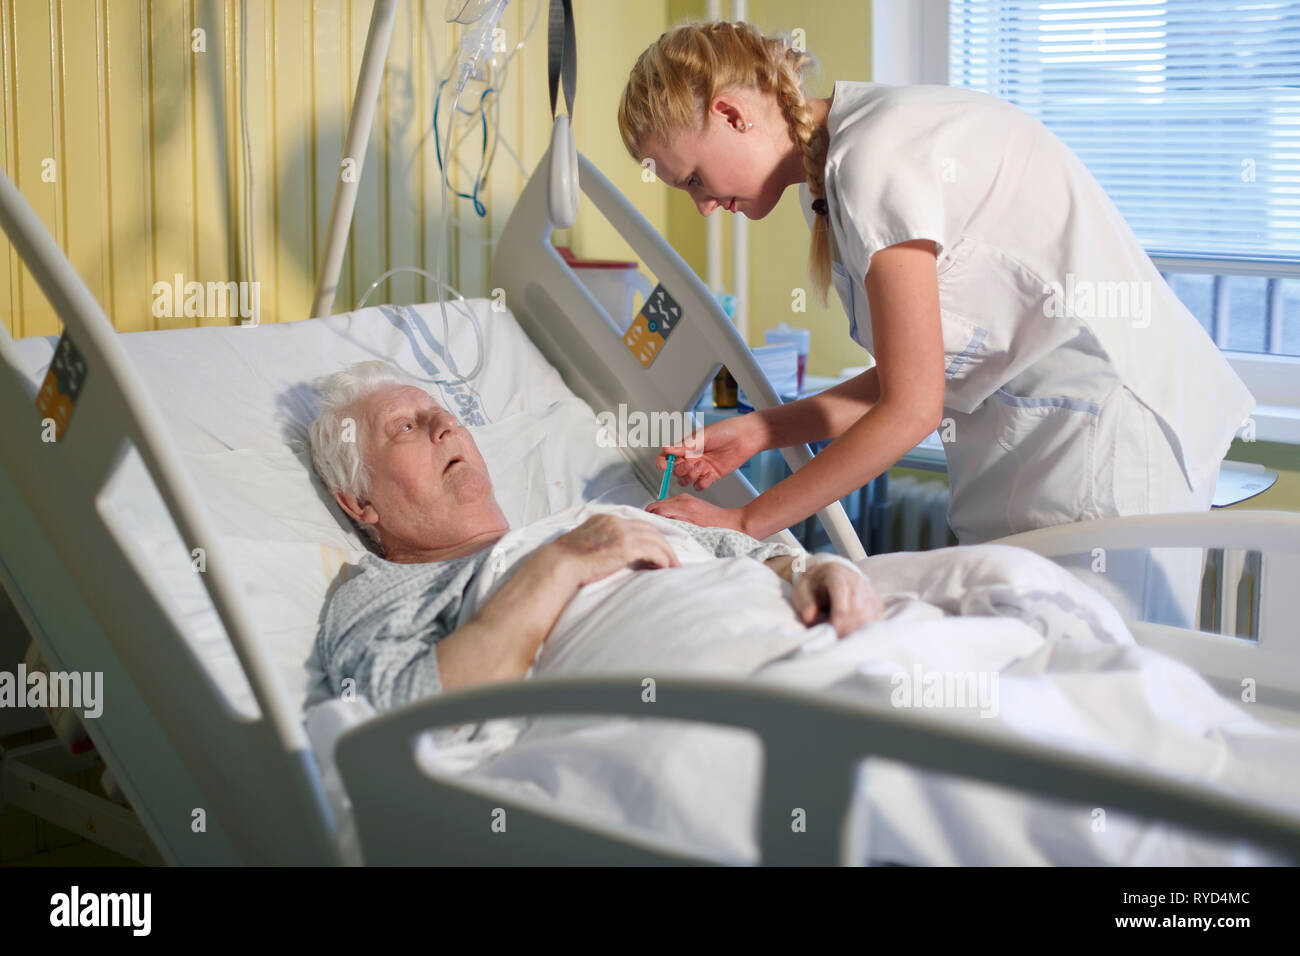 A Nurse Takes Care Of A Patient In A Hospital Bed Karlovy Vary Czech 